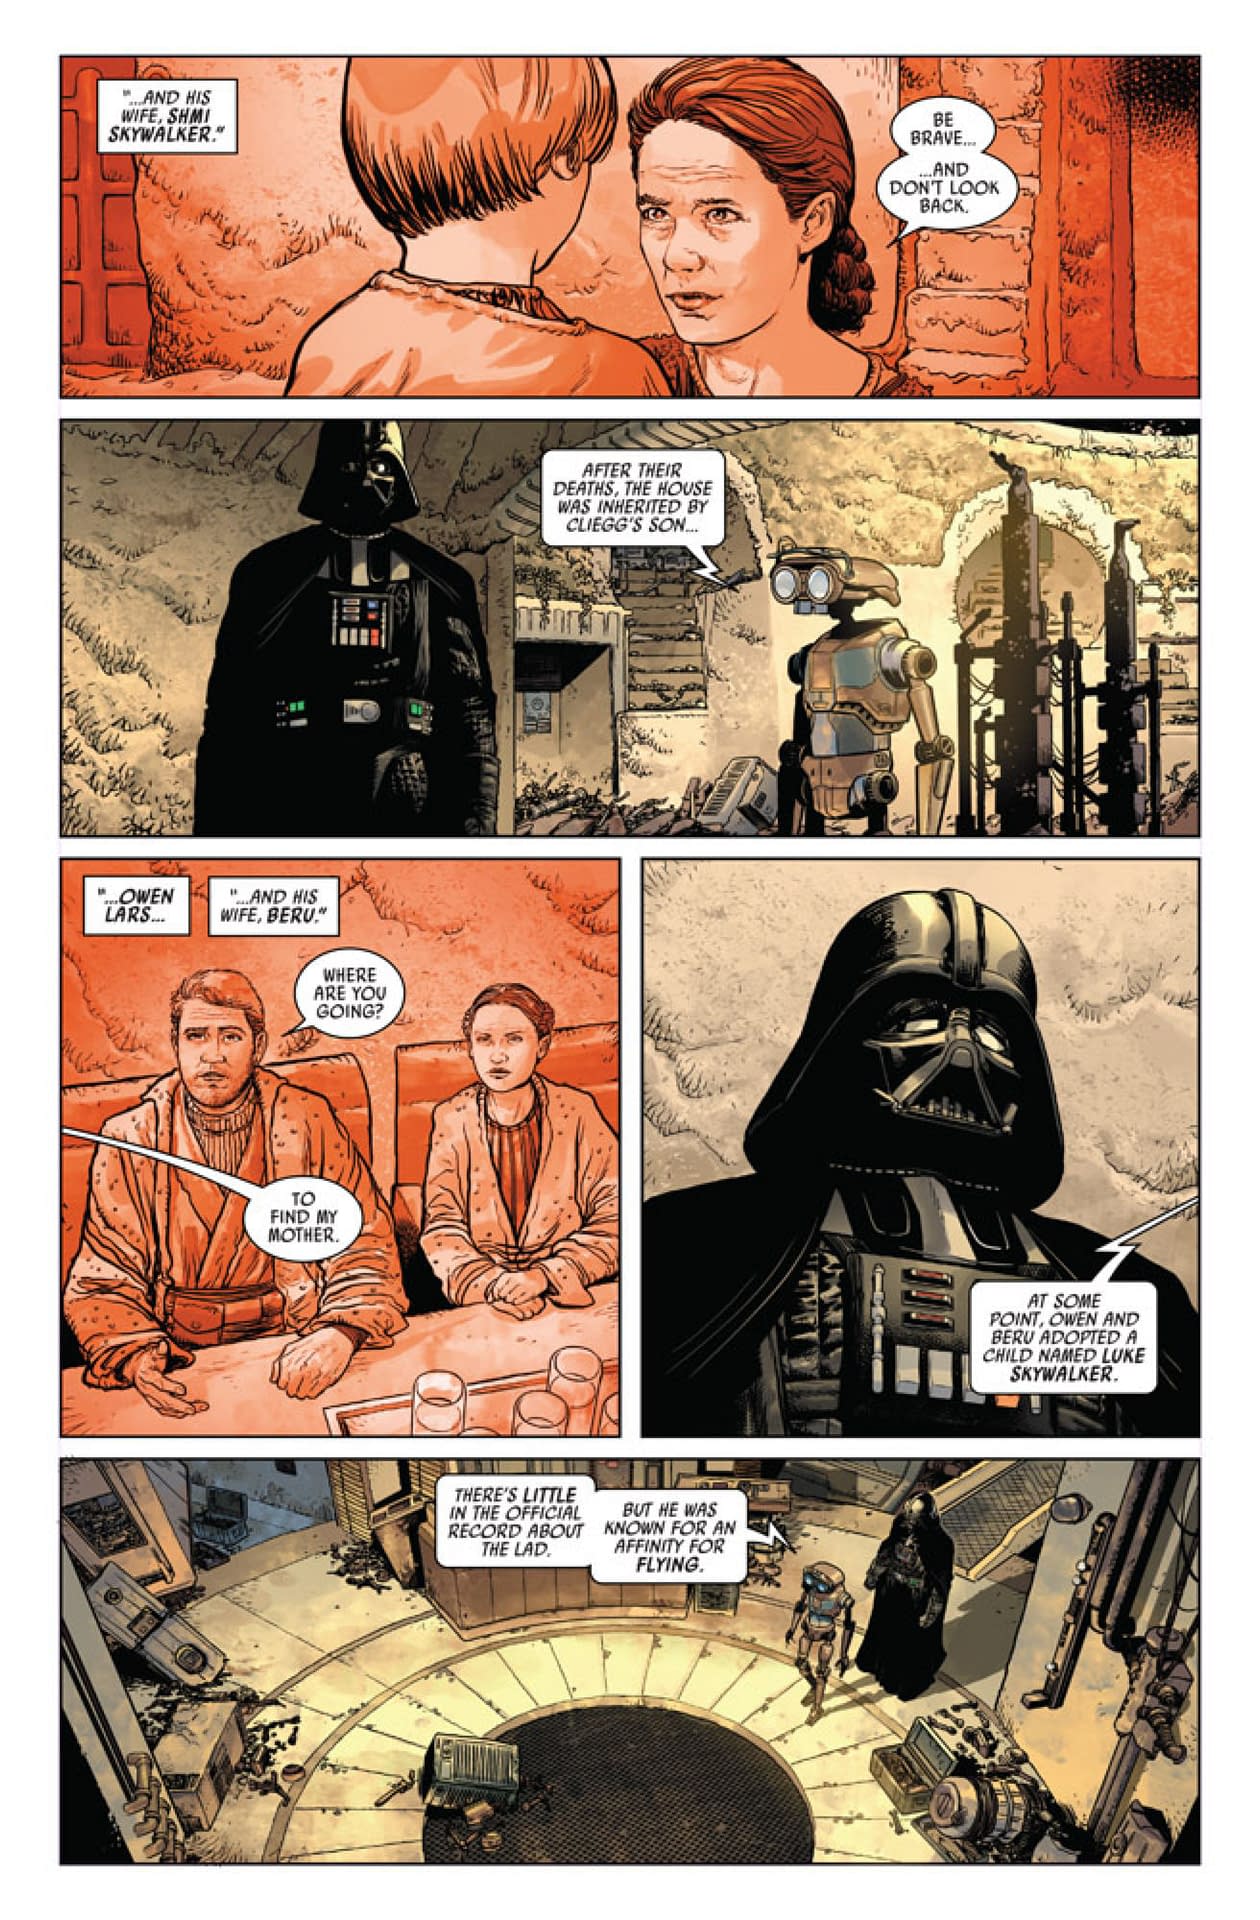 Darth Vader Haunted by Images of the Star Wars Prequels in New Darth Vader #1 [Preview]